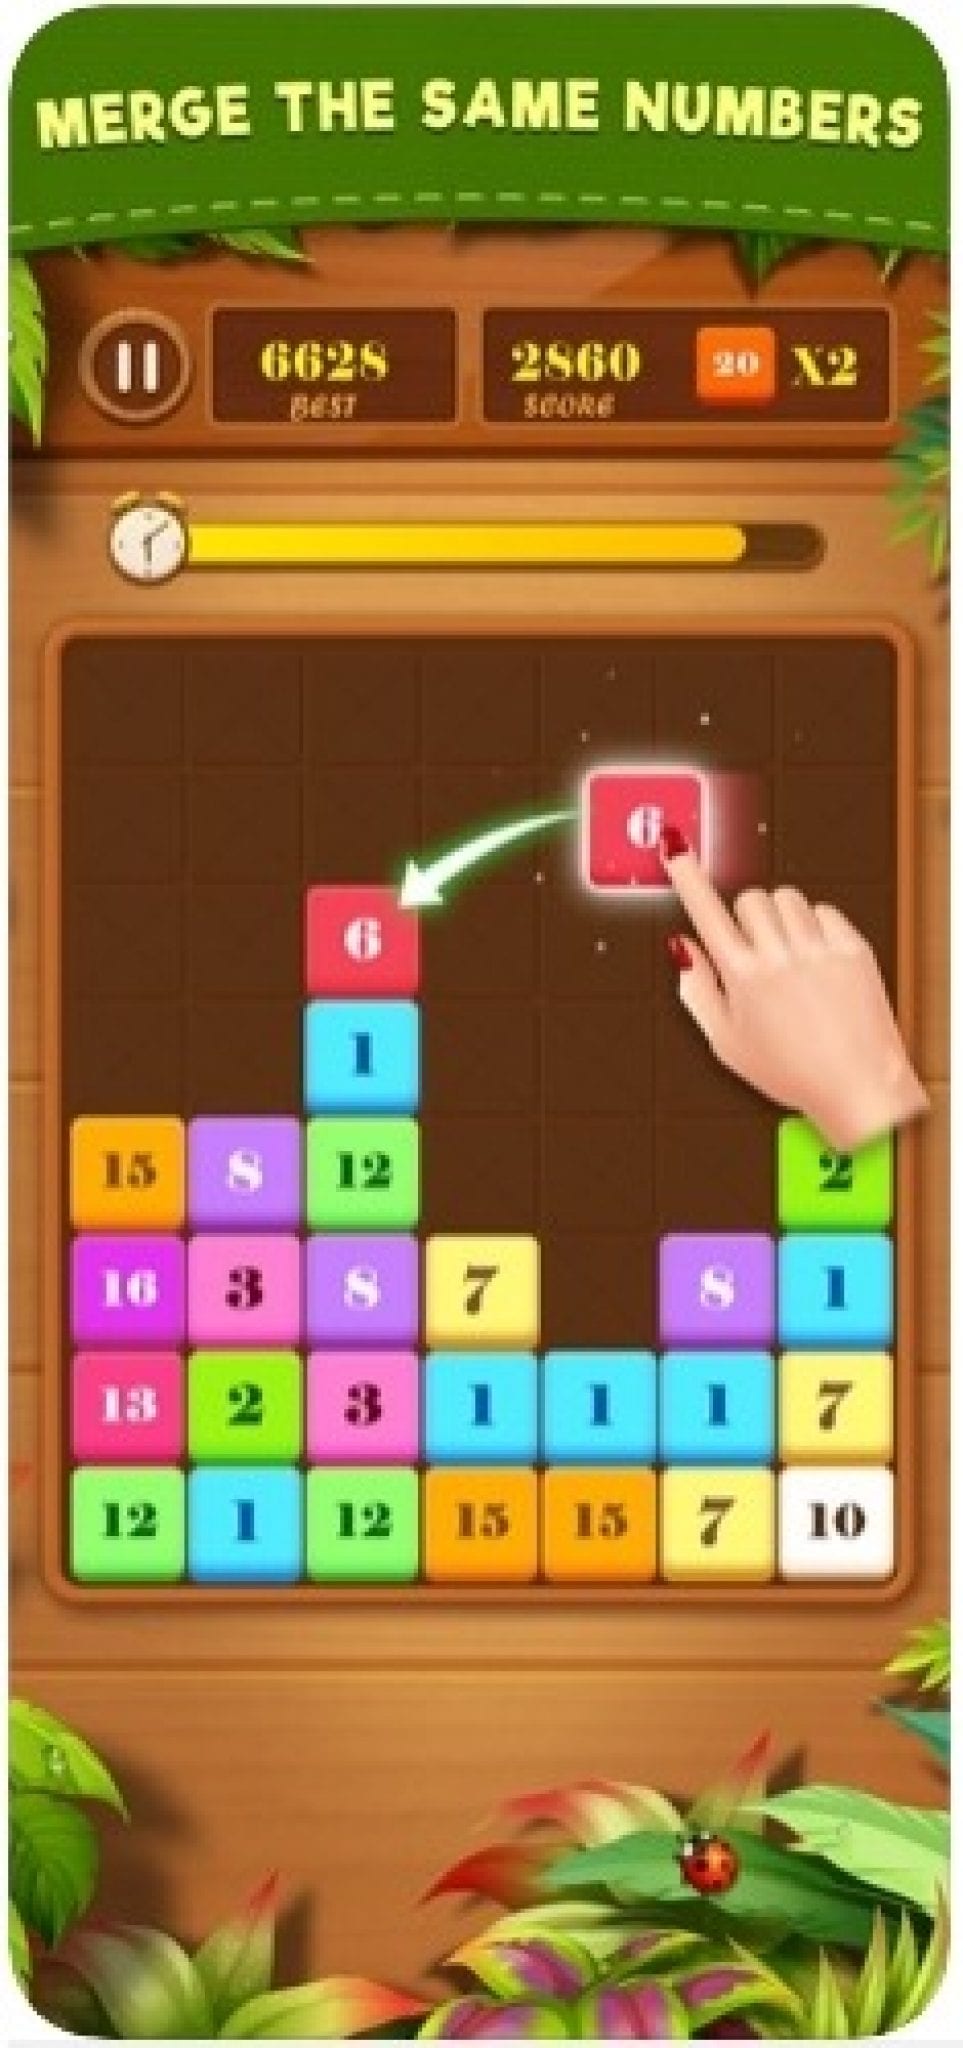 Merge Adventure: Merge Games download the new version for ios